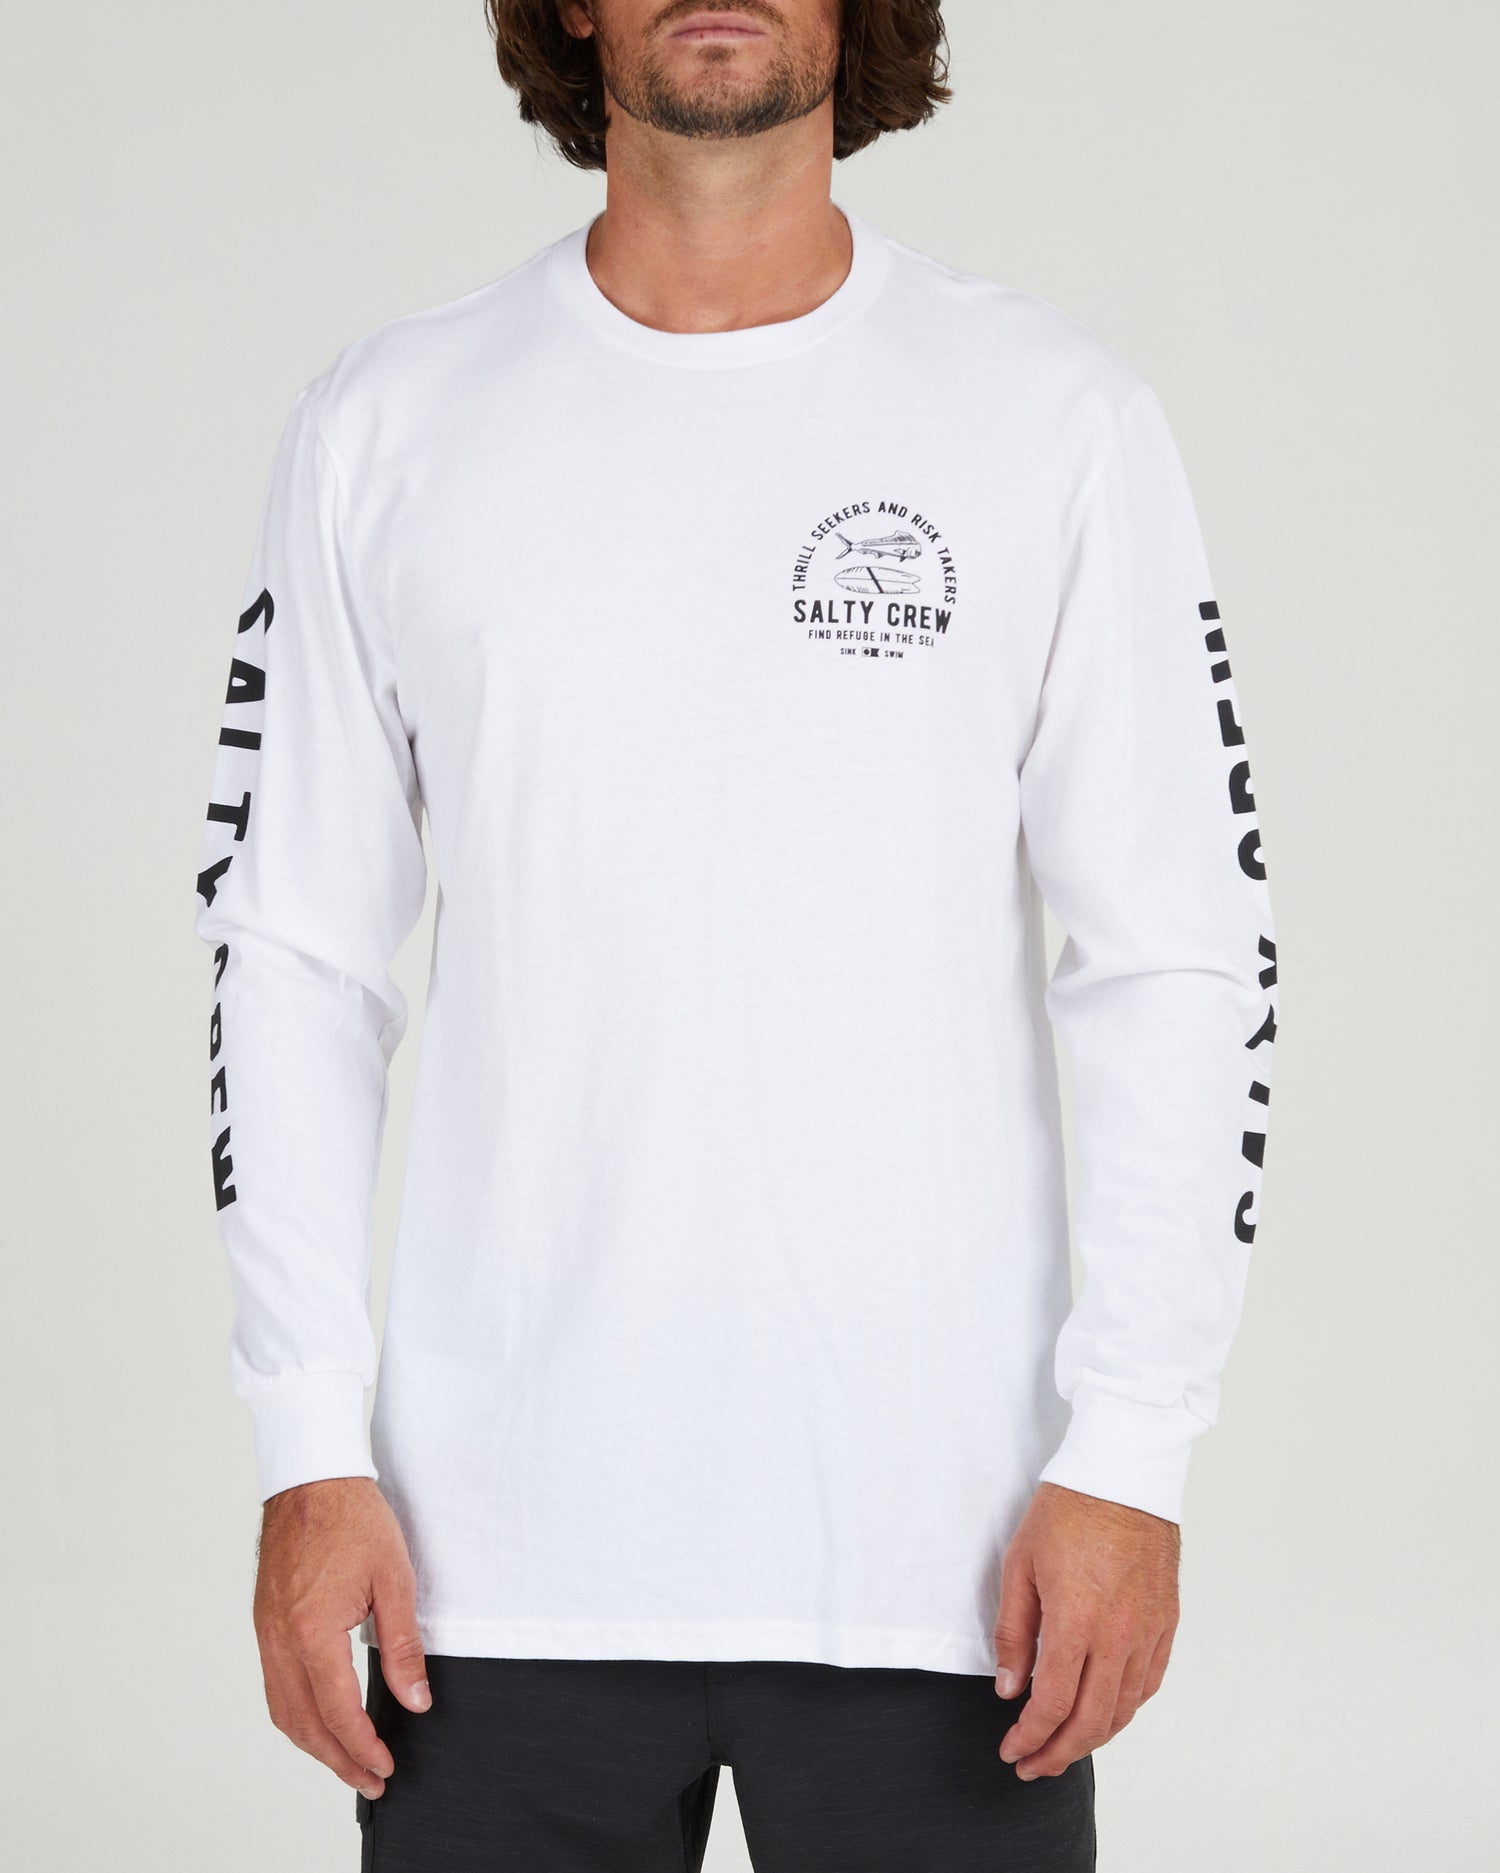 On body front of the Lateral Line White L/S Standard Tee